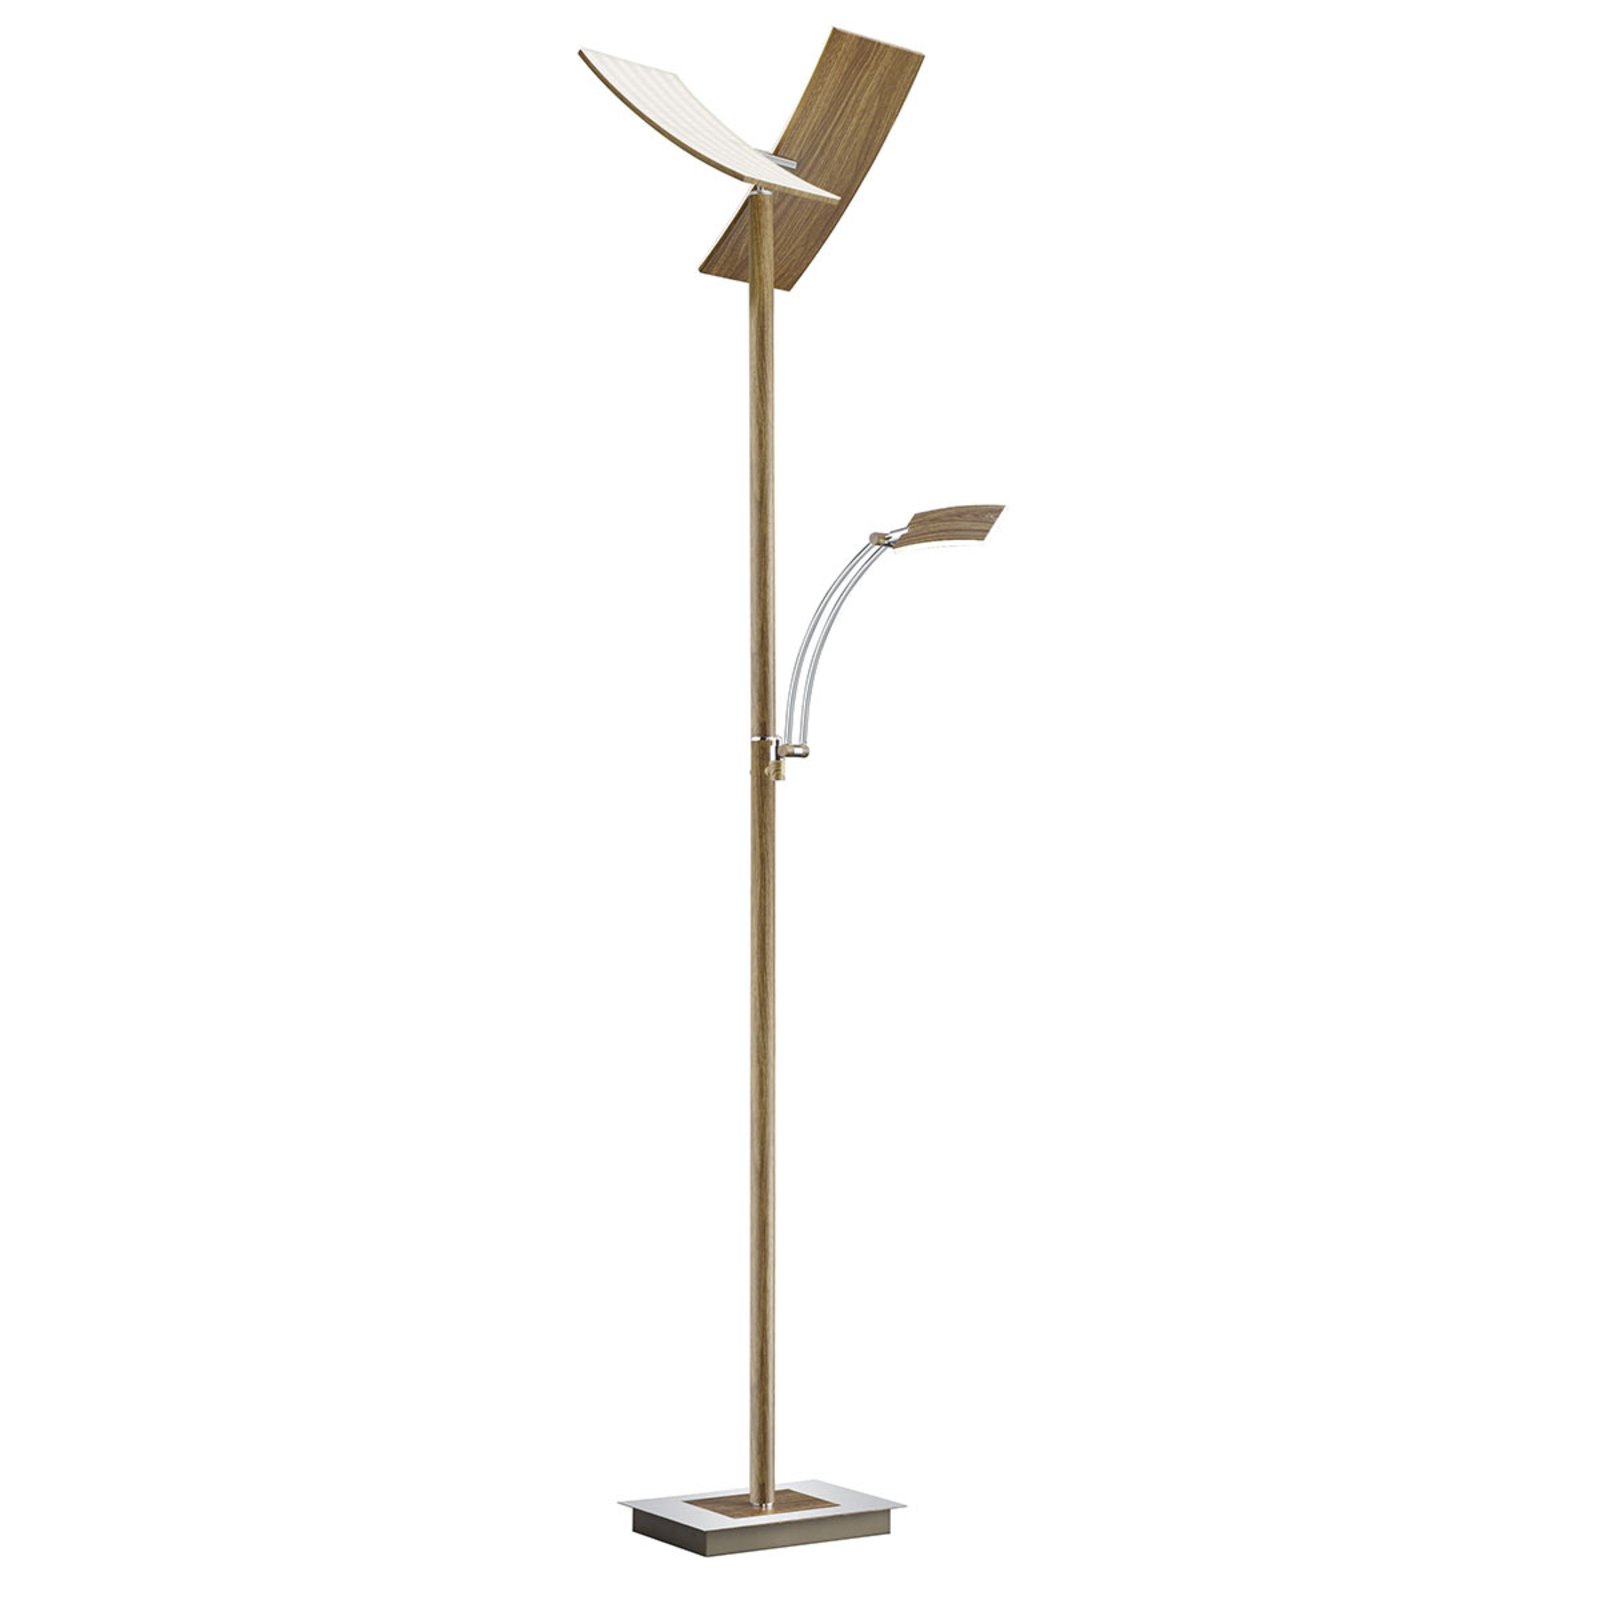 Duo LED floor lamp with a dimmer, wood